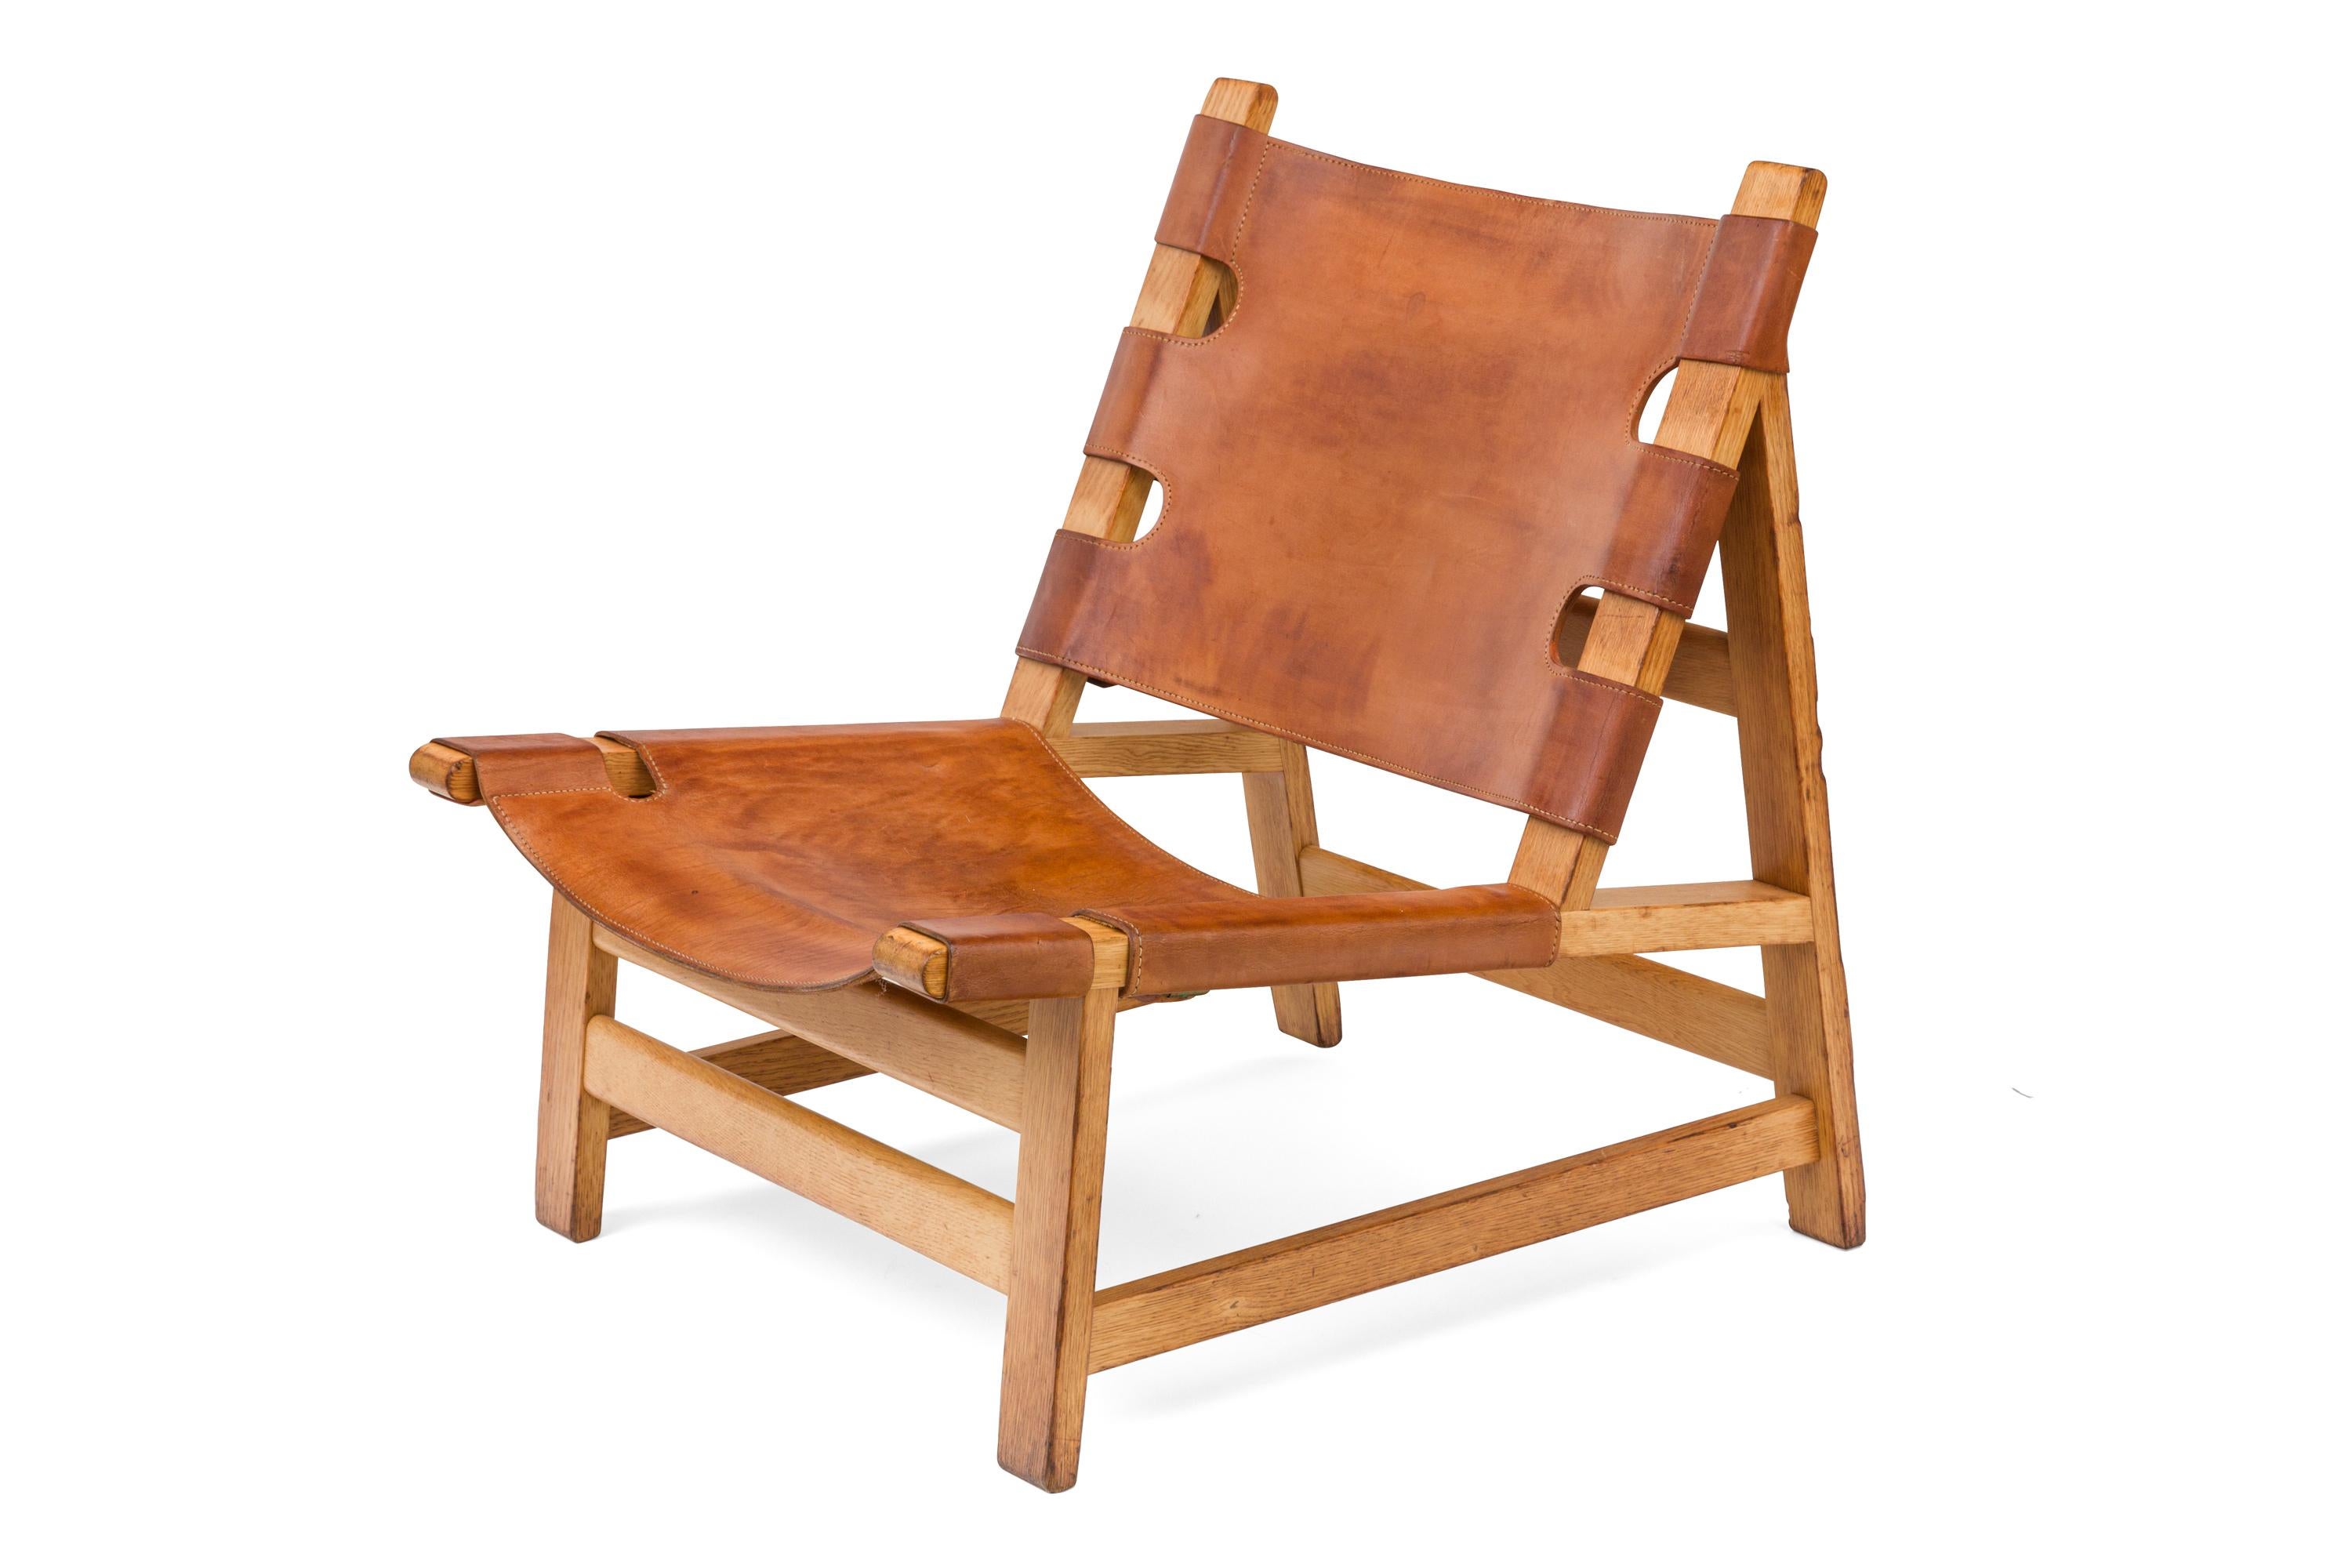 Mid-20th Century Børge Mogensen Oak and Leather Lounge Chairs, Denmark, 1960s For Sale